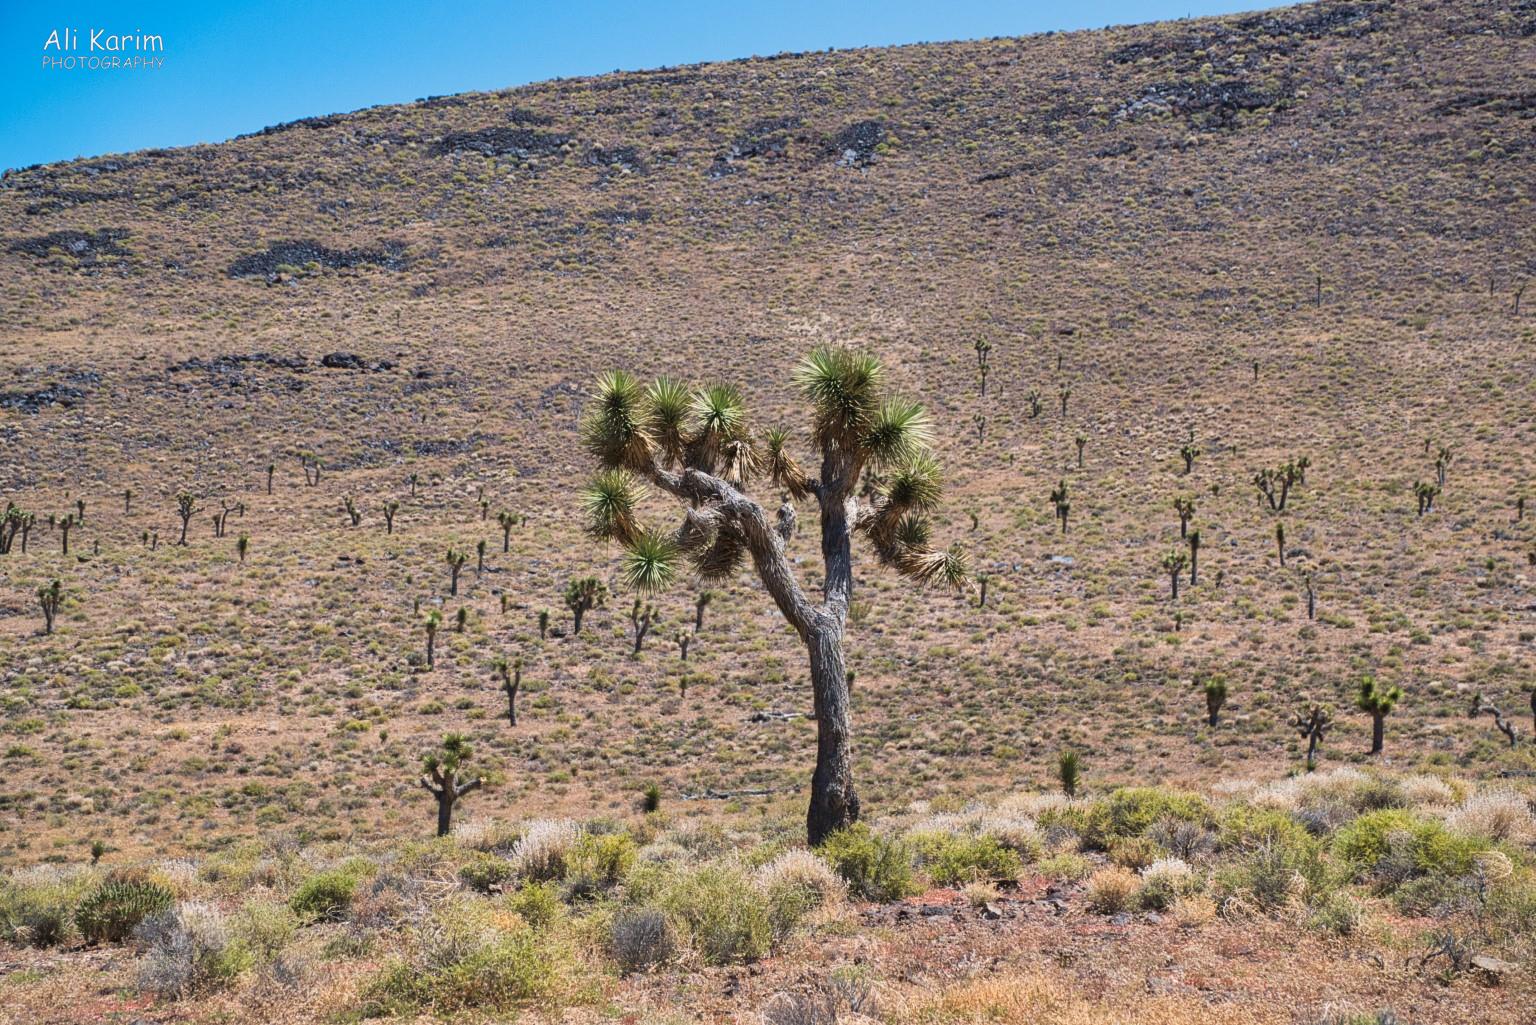 Yosemite to Death Valley, June 2020, Joshua Trees grows at higher elevations of Mojave desert